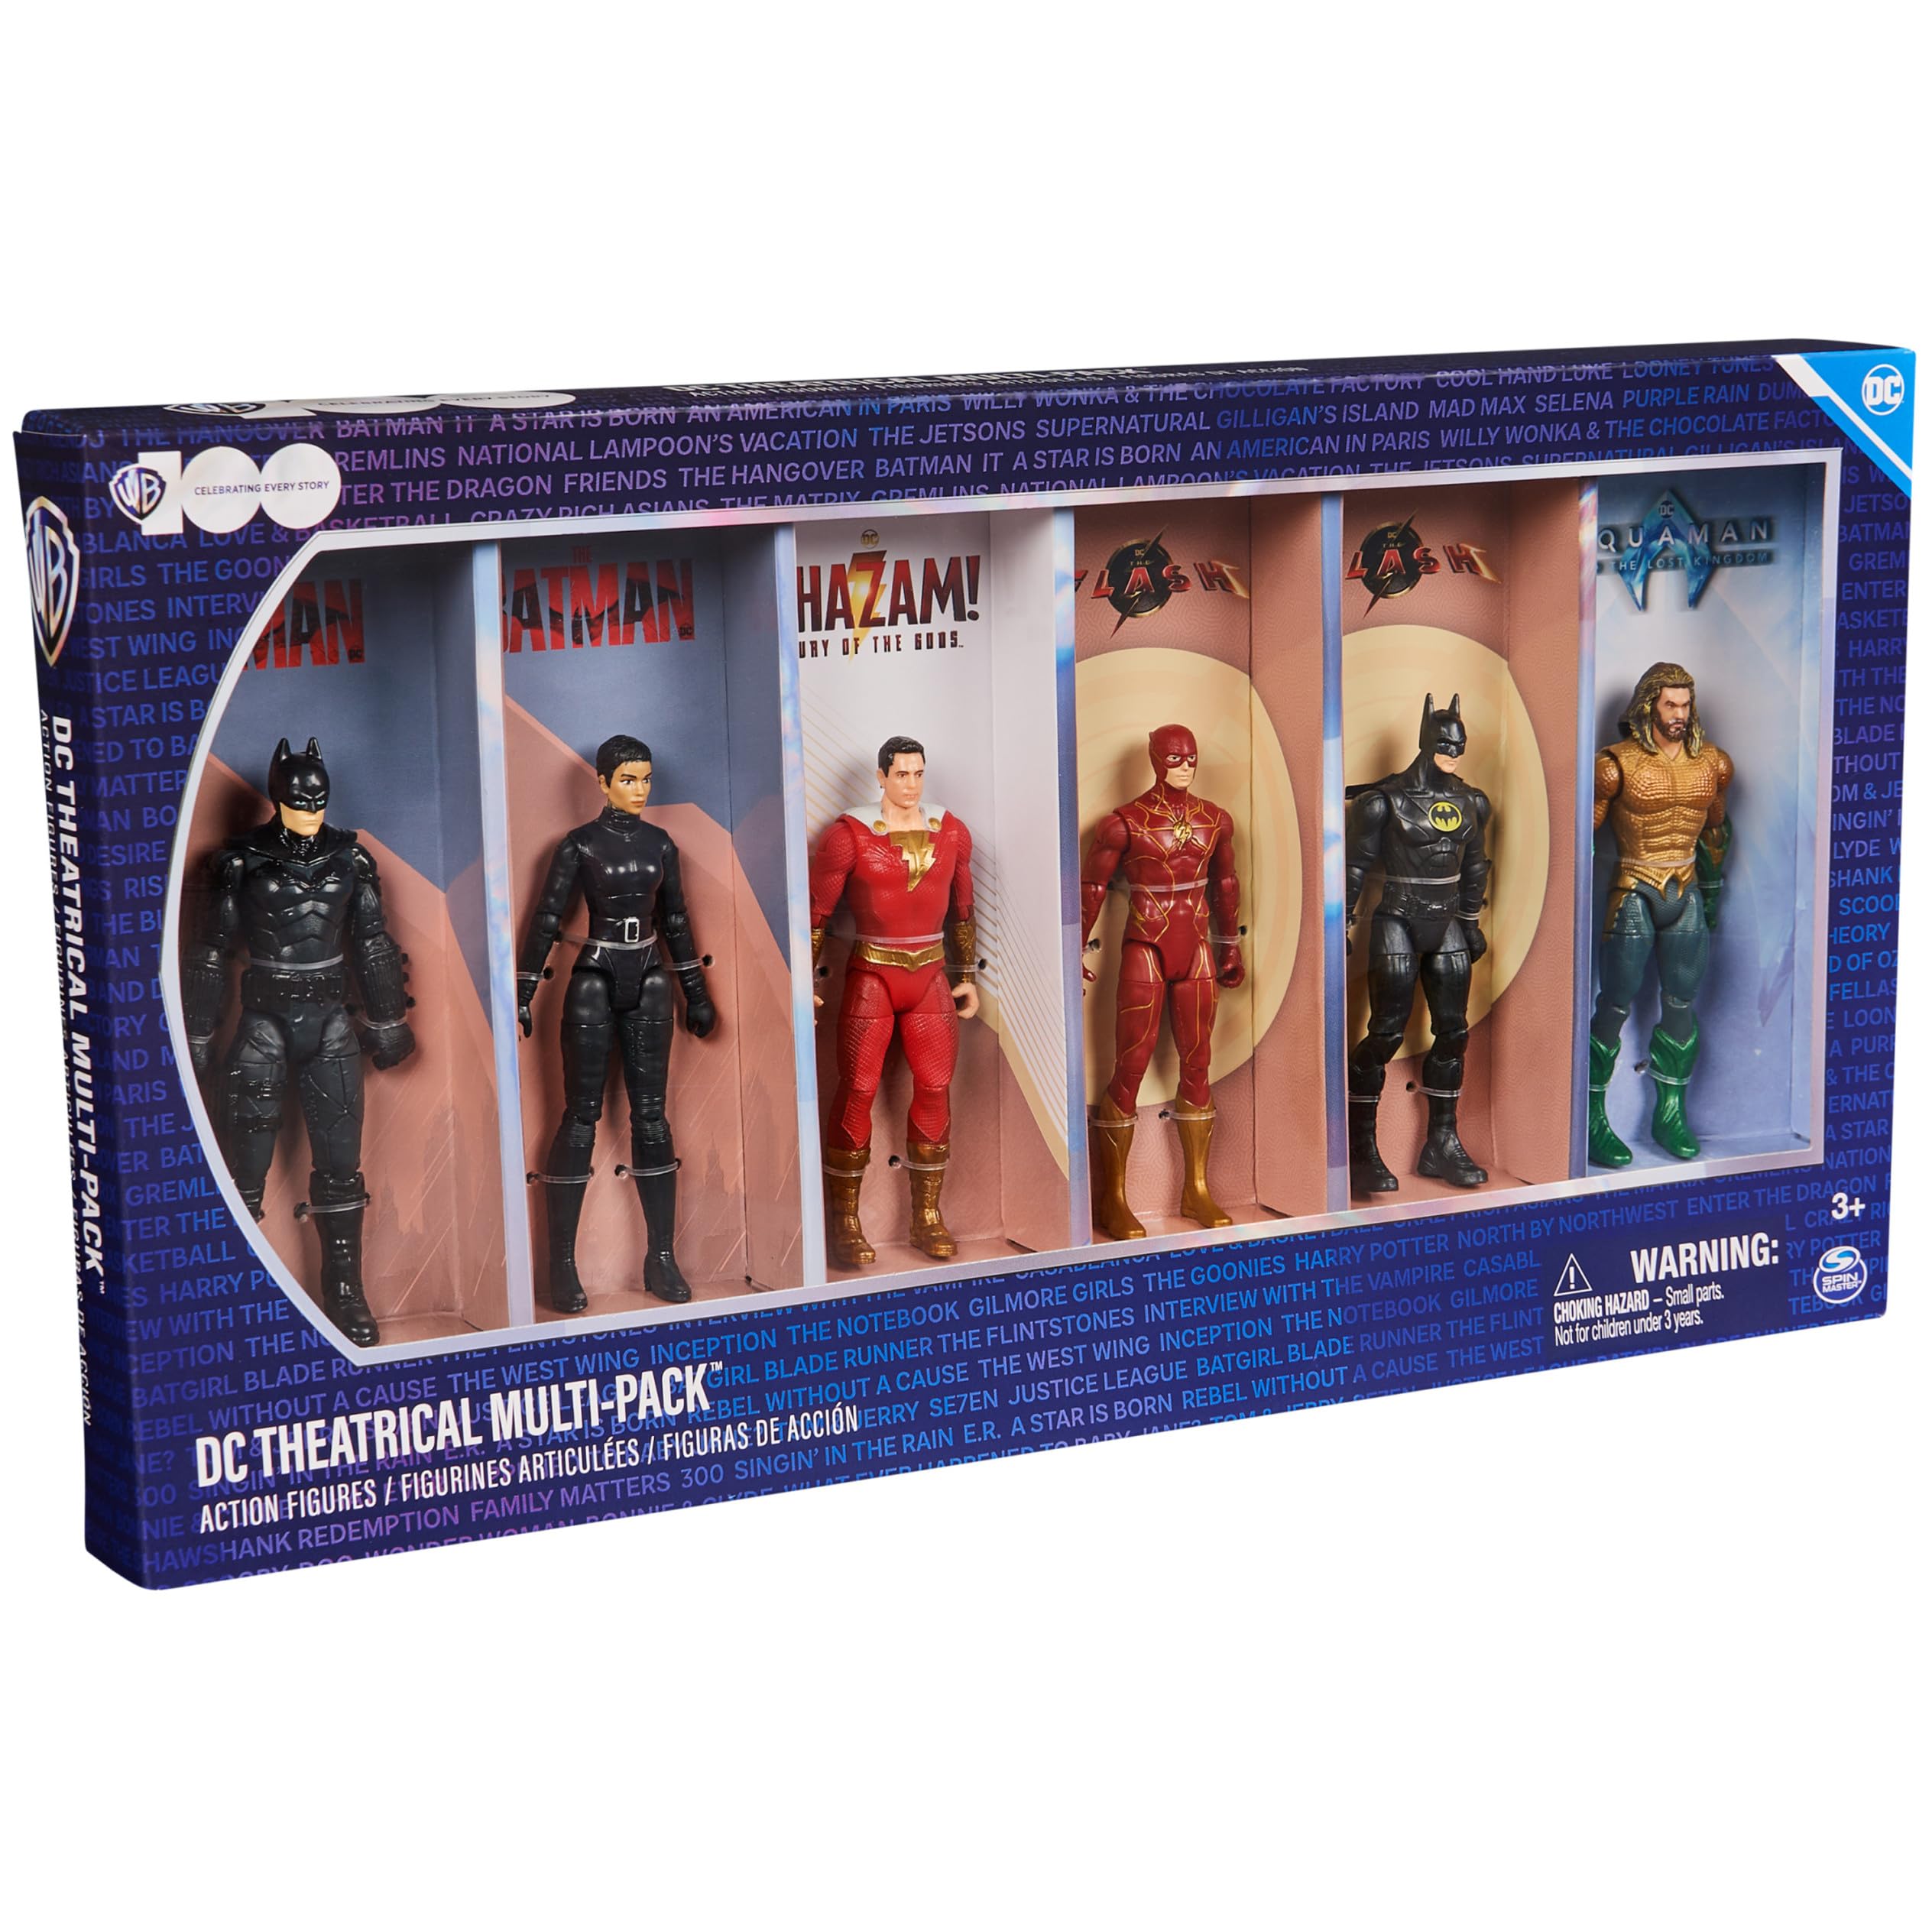 DC Comics, DC Theatrical Multi-Pack (Limited Edition), 6 Iconic Super Hero Action Figures, 4-inch Tall, WB 100 Years Anniversary Collectible, Superhero Kids Toys for Boys and Girls, Ages 3+